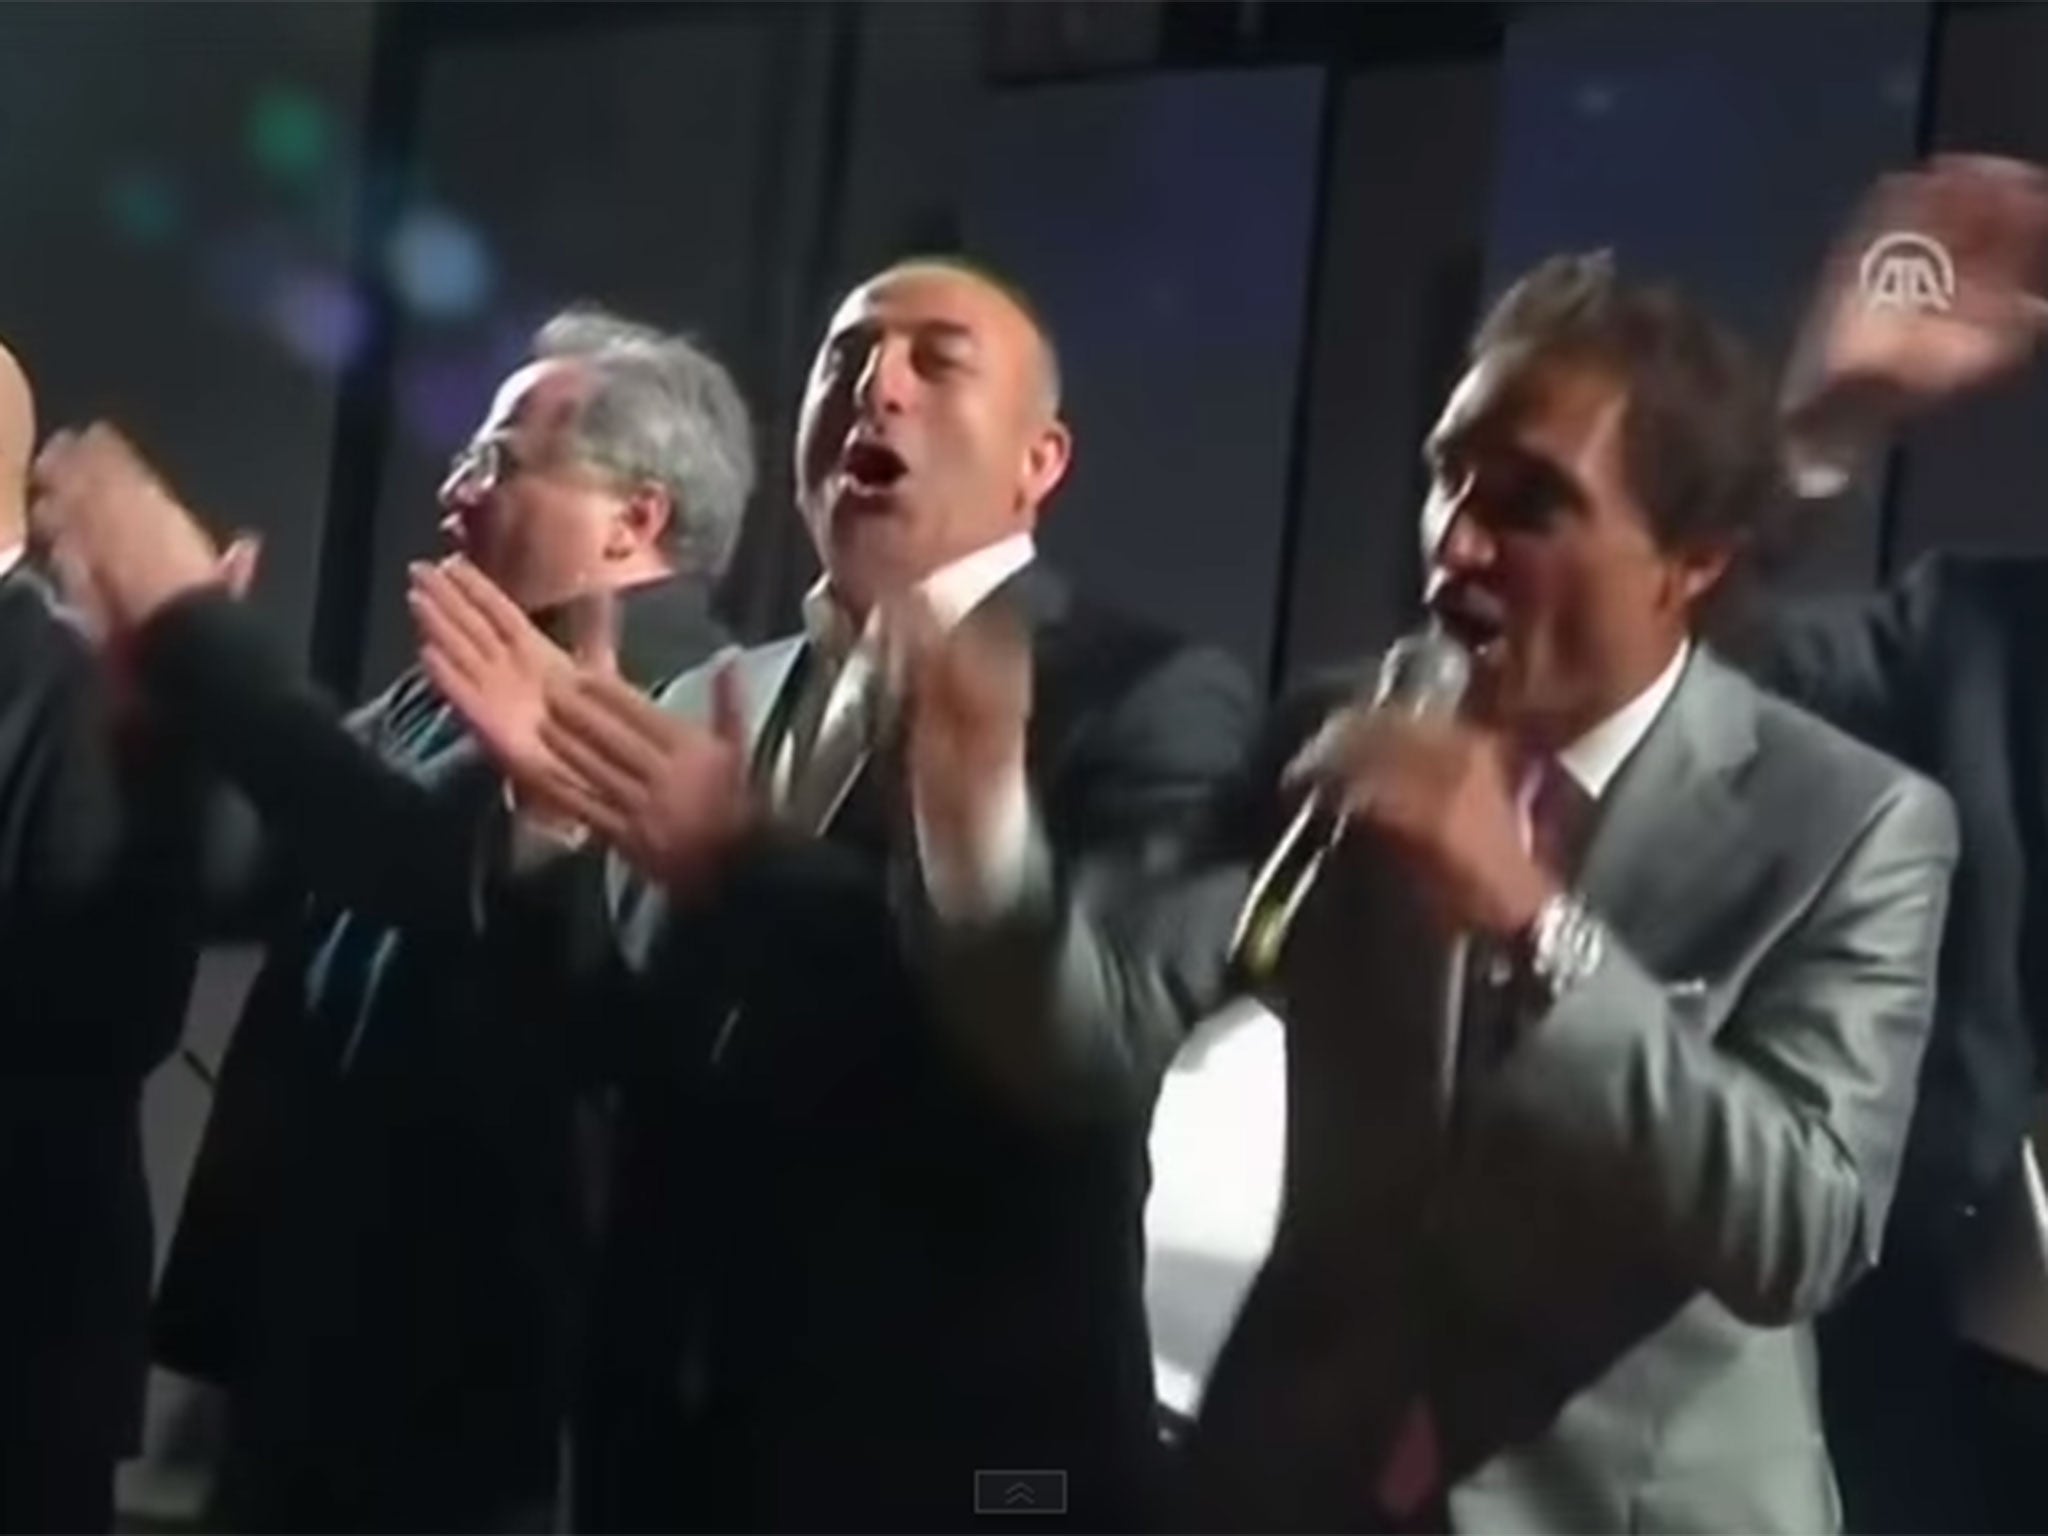 Dignitaries were invited up on stage at the Nato conference by the Turkish band